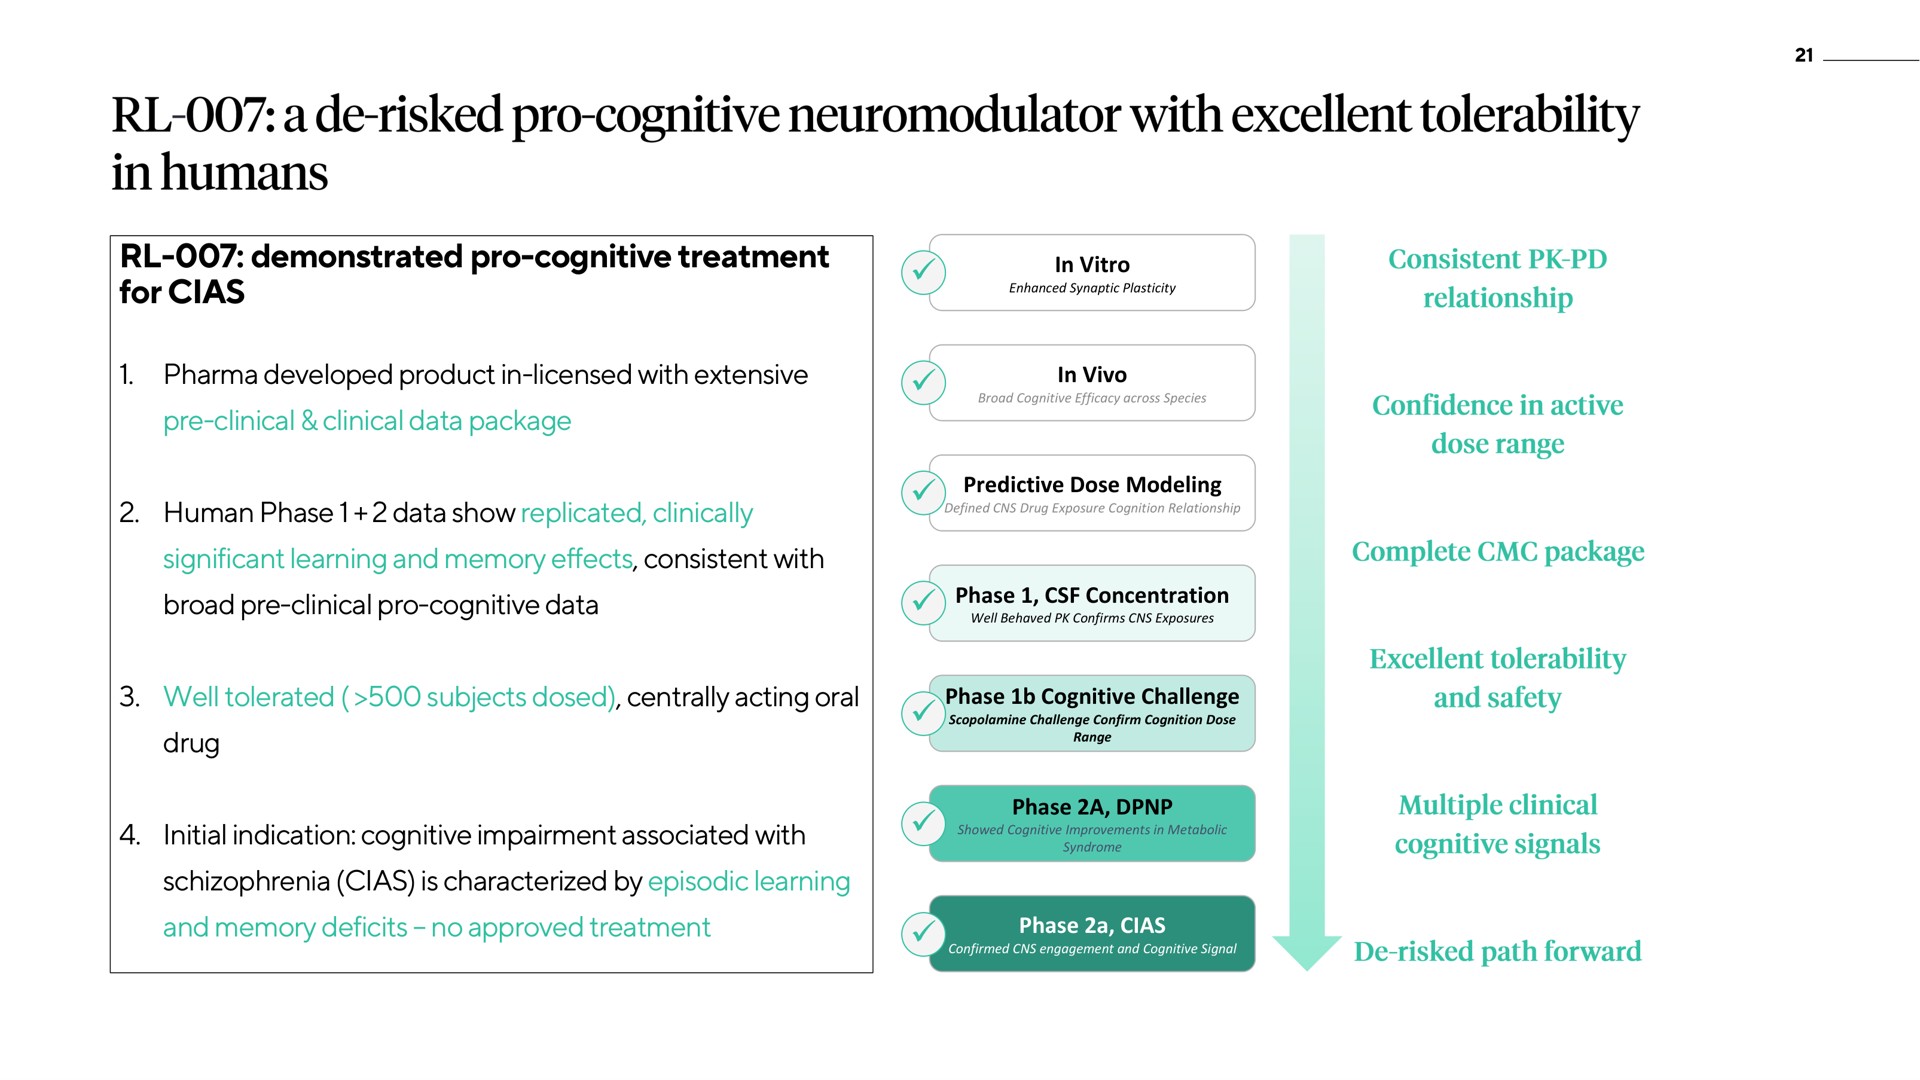 demonstrated pro cognitive treatment for developed product in licensed with extensive clinical clinical data package human phase data show replicated clinically significant learning and memory effects consistent with broad clinical pro cognitive data well tolerated subjects dosed centrally acting oral drug initial indication cognitive impairment associated with schizophrenia is characterized by episodic learning and memory deficits no approved treatment a risked excellent tolerability | ATAI